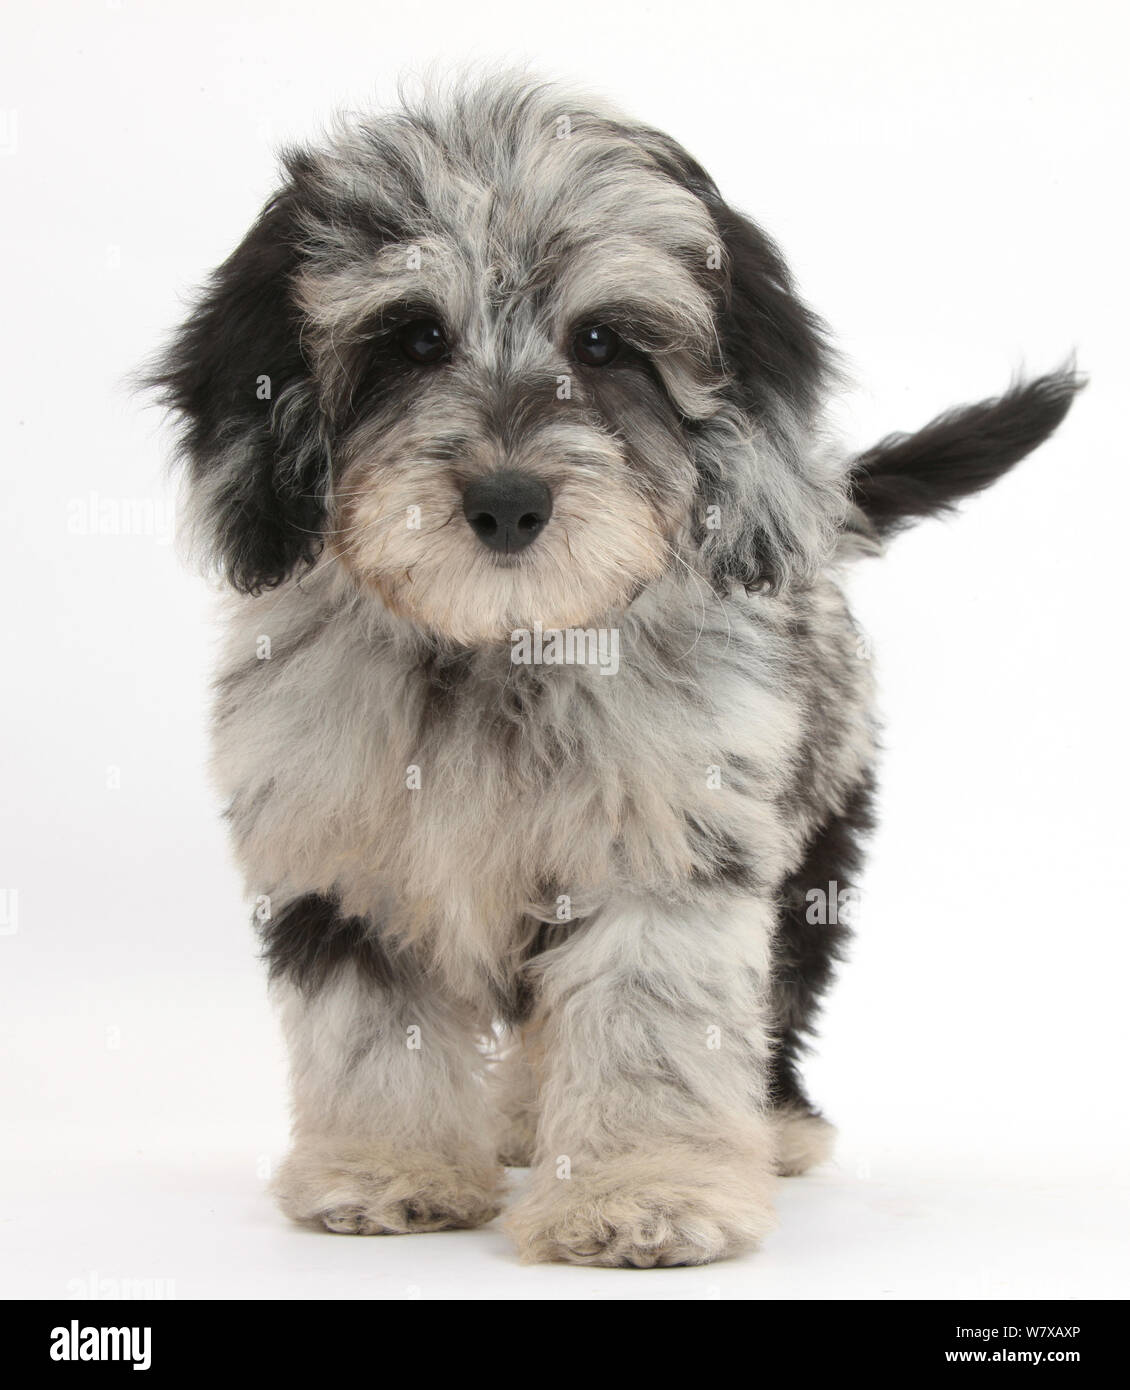 Black and grey Daschund x Poodle 'Daxie doodle' puppy, walking. Stock Photo